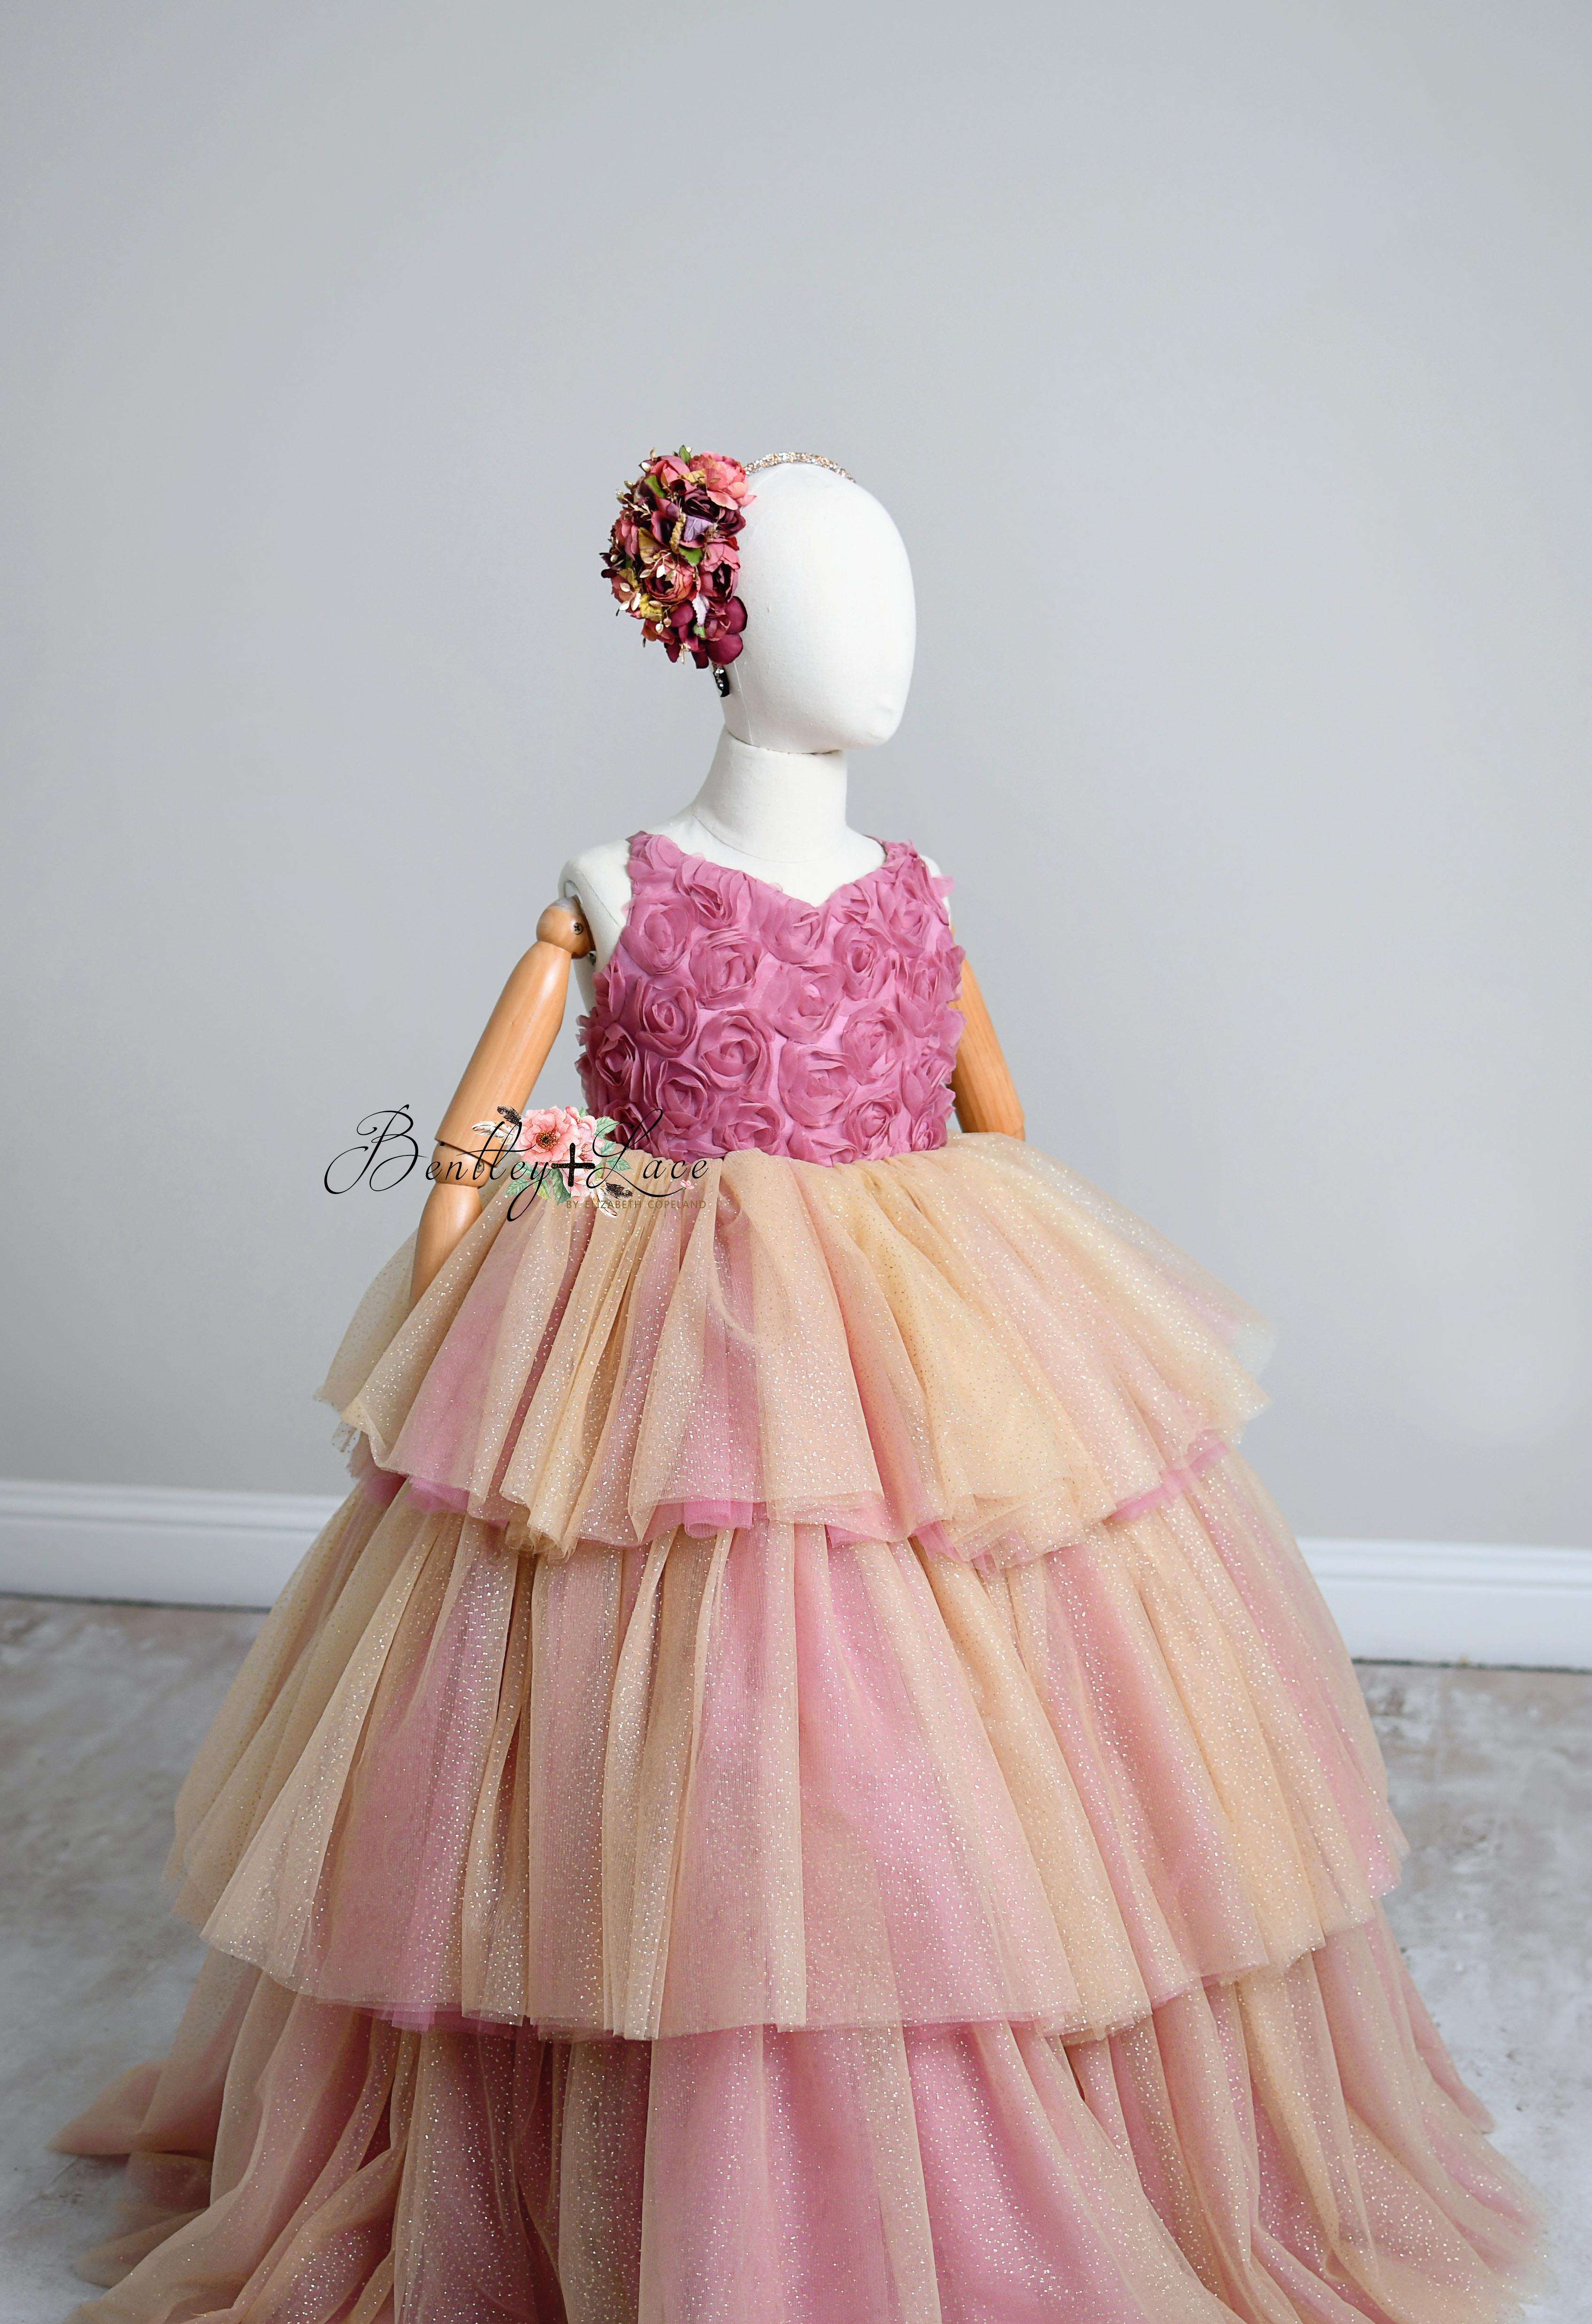 UPGRADE TO A SIMPLE TULLE SKIRT WITH GLITTER ACCENTS